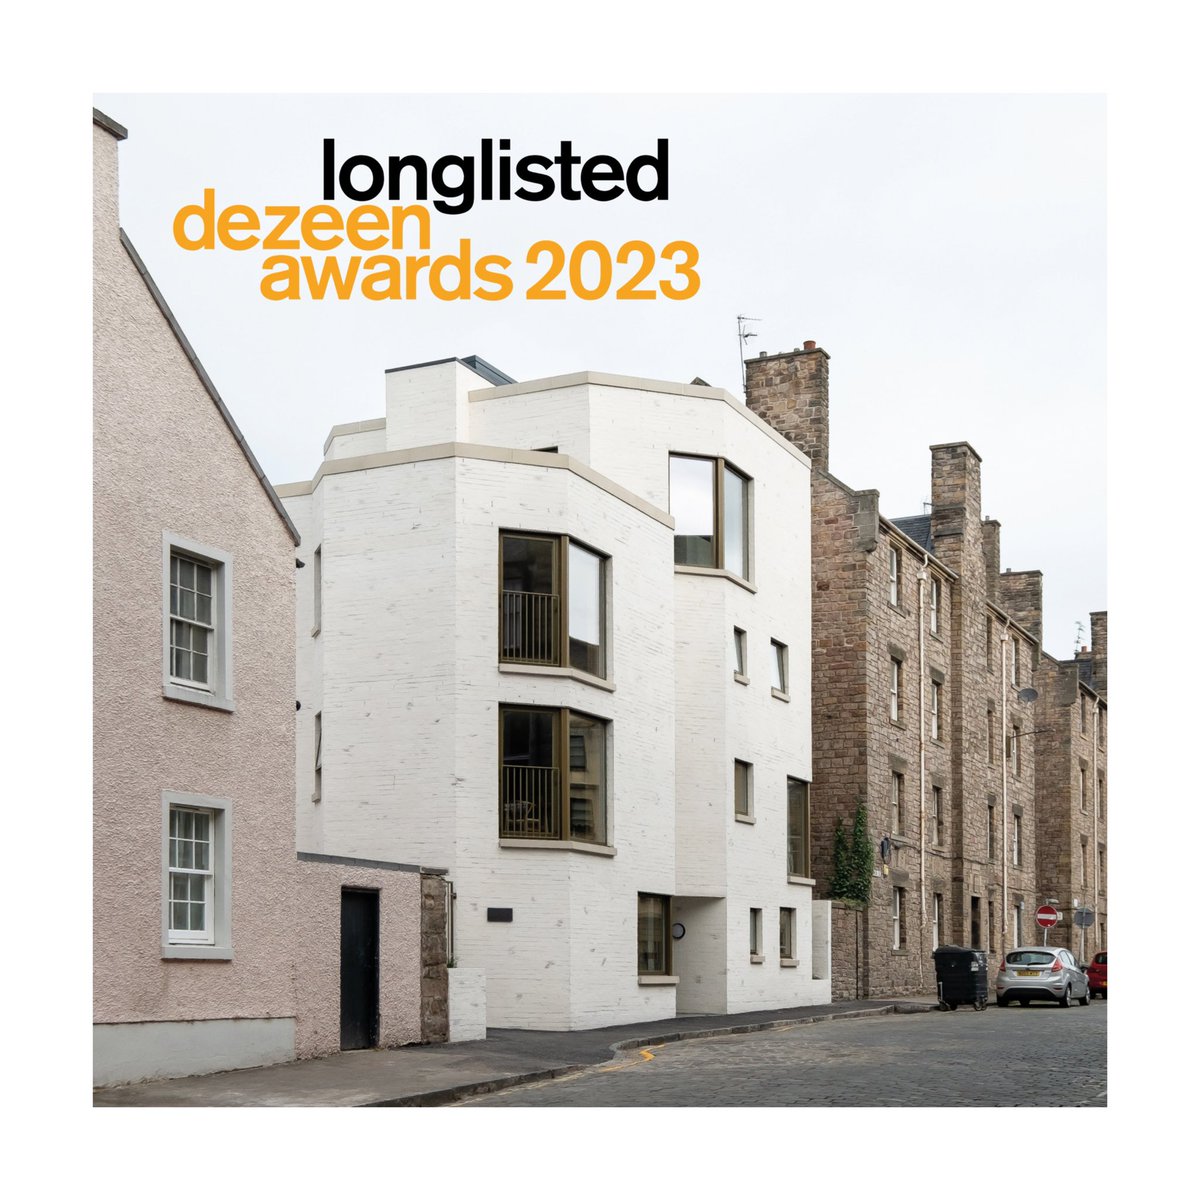 Simon Square has been shortlisted in the prestigious Dezeen Awards 2023. It is included in the Housing category, joining fantastic projects from as far away as Australia, Cambodia and Iran, as well as others closer to home in Belgium, the Netherlands and Spain #dezeenawards